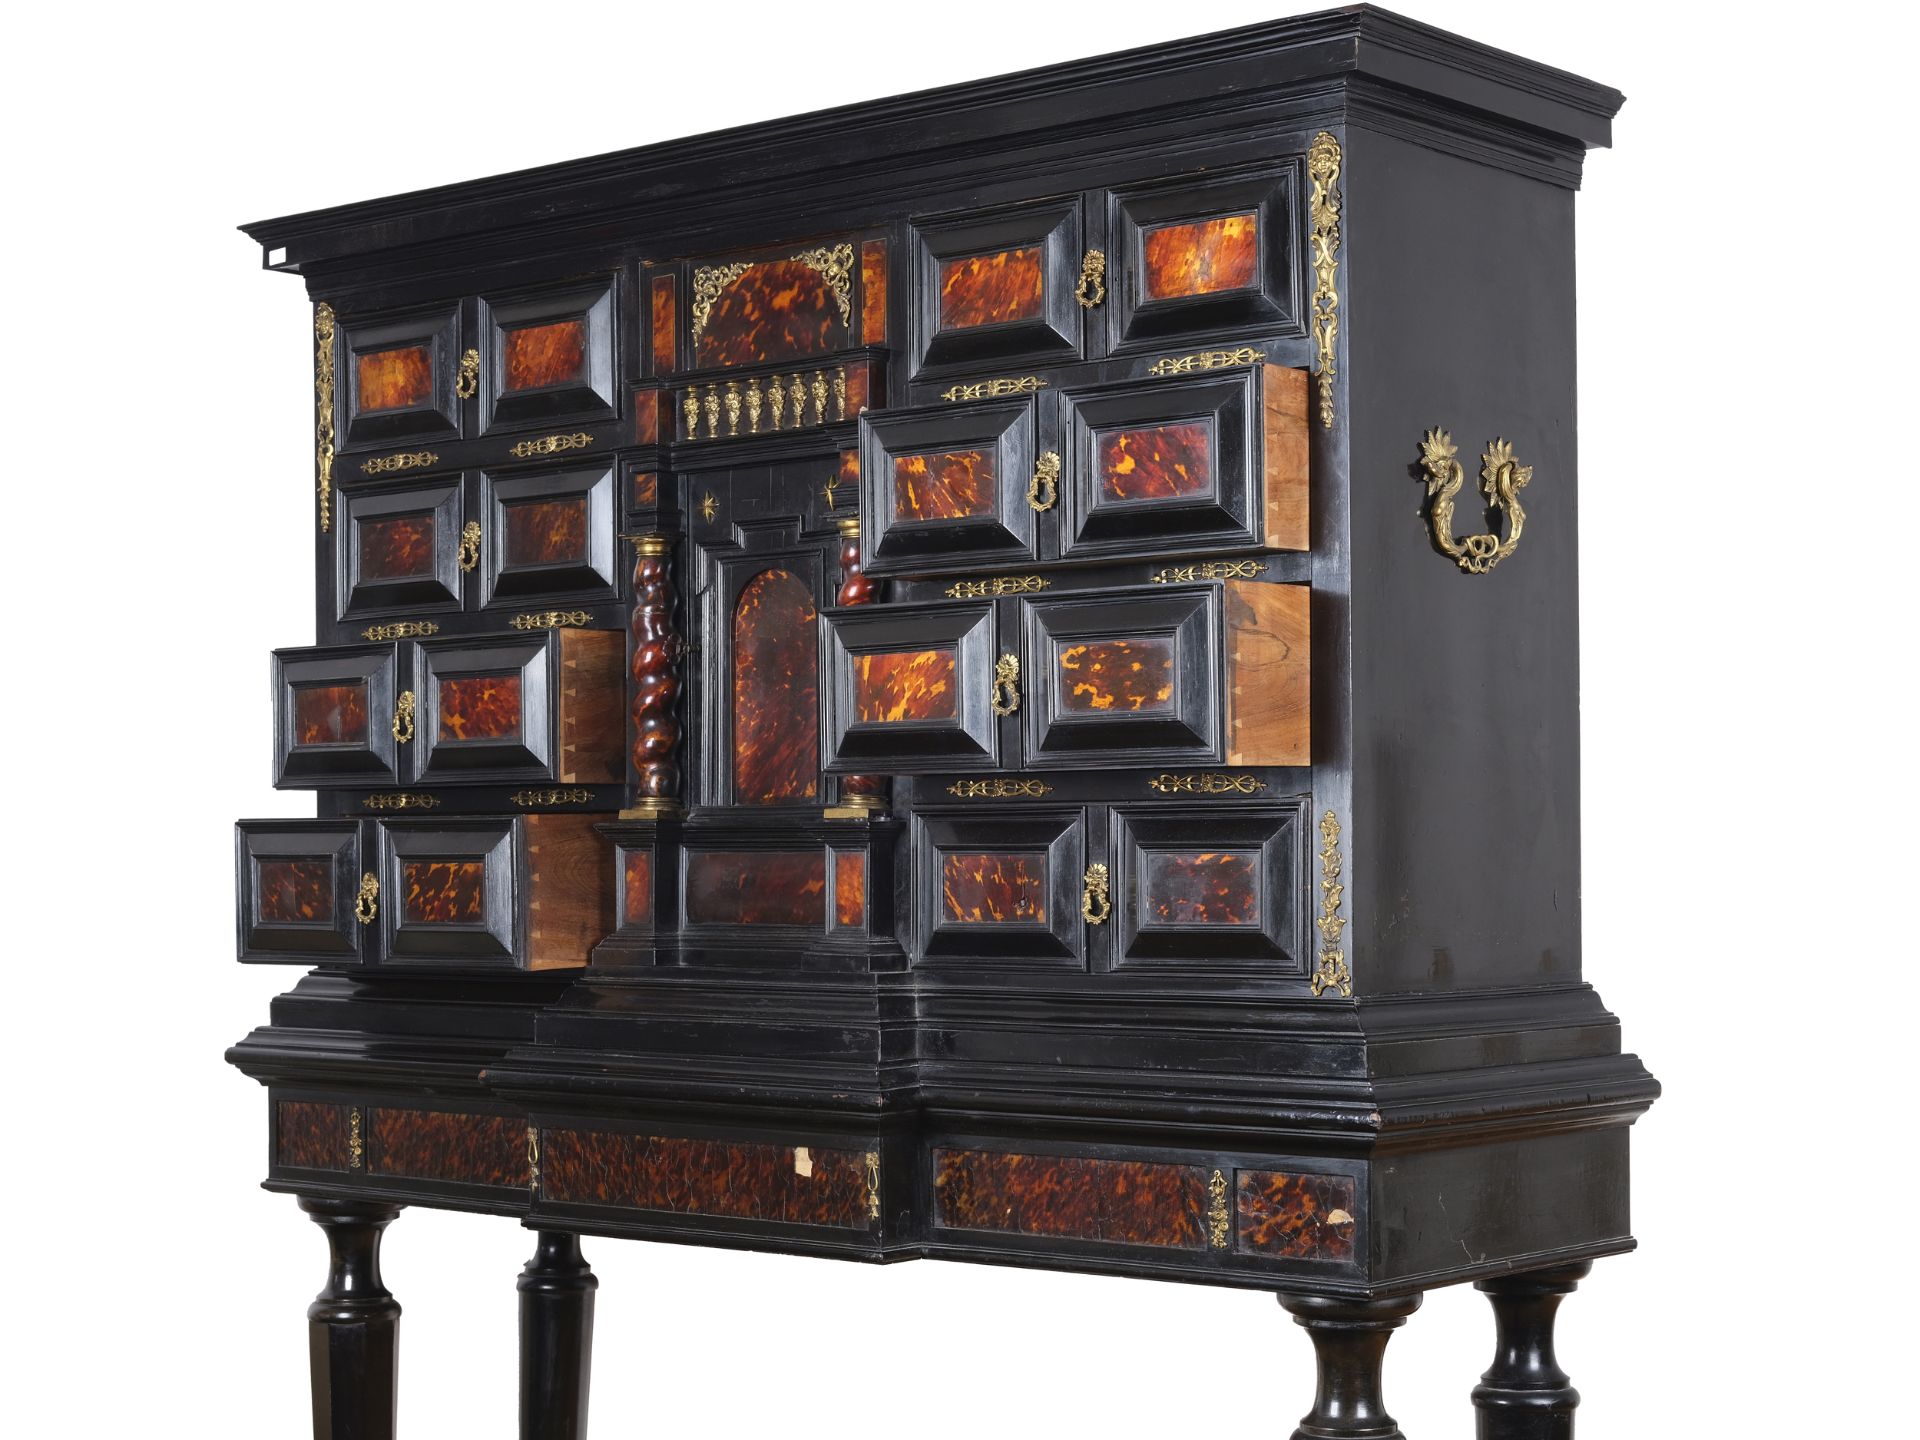 Top cabinet, German or Flemish, in the style of the 17th century - Image 4 of 7